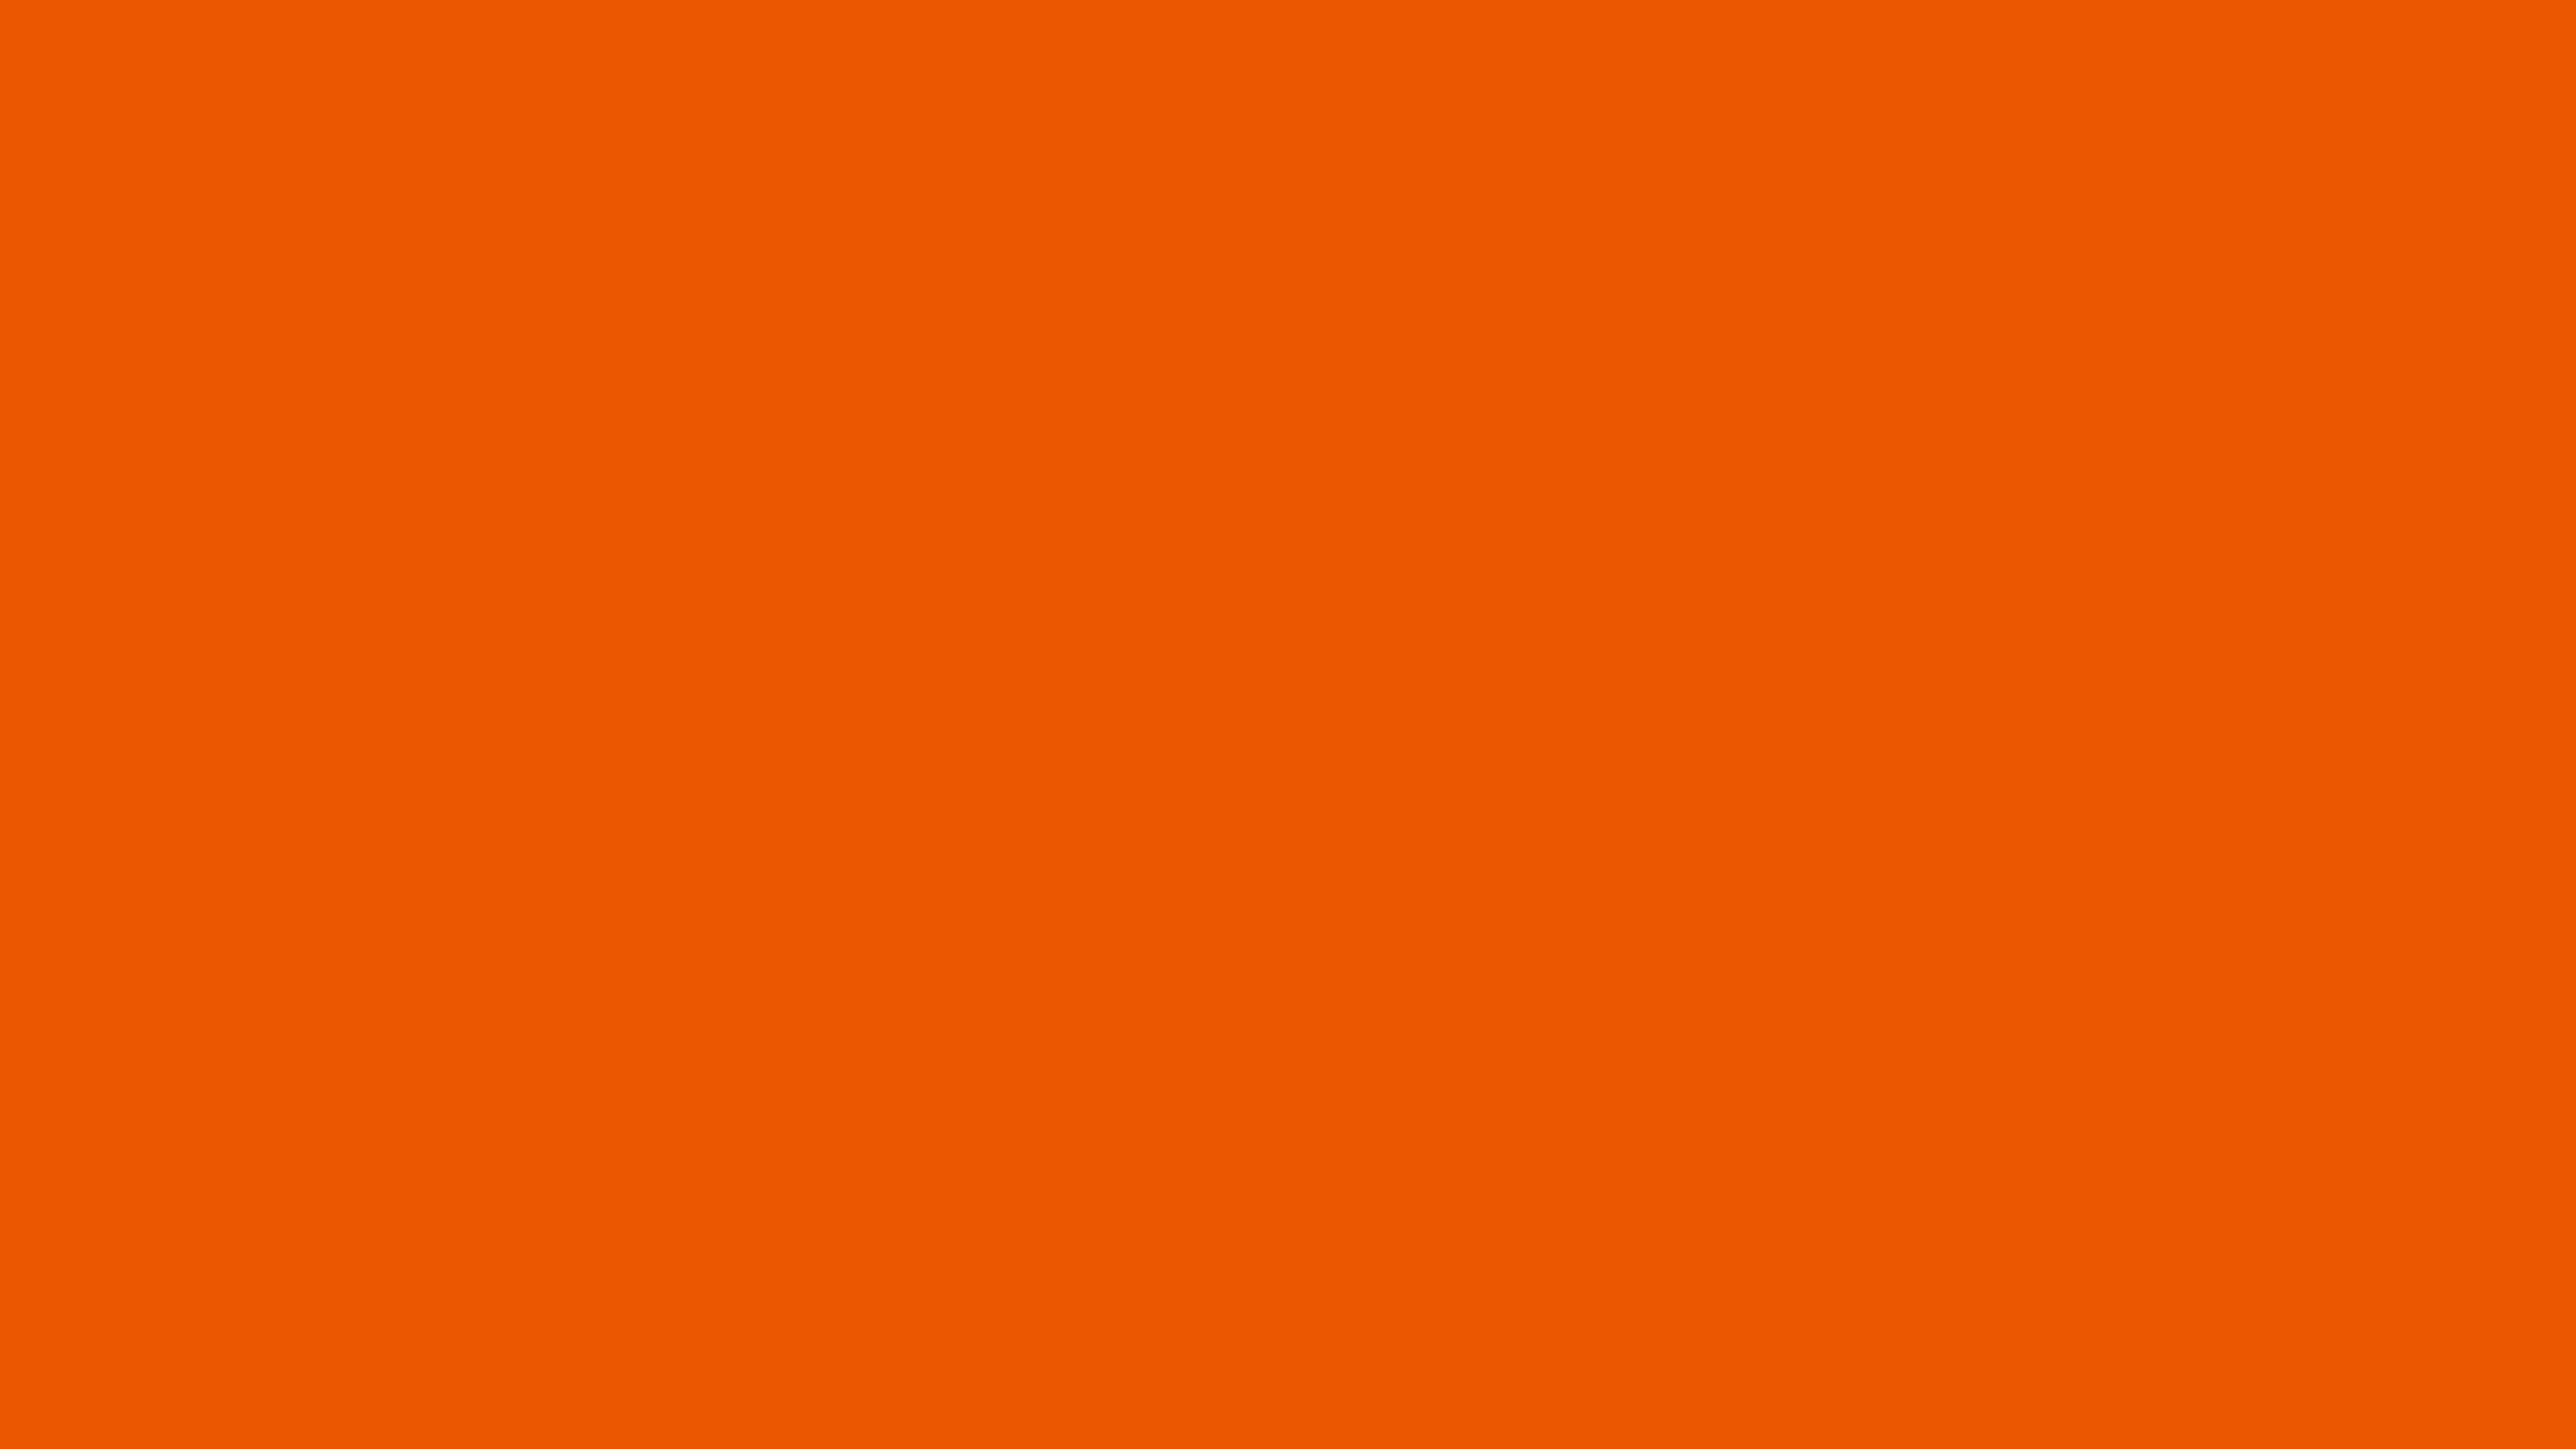 7680x4320 Persimmon Solid Color Background